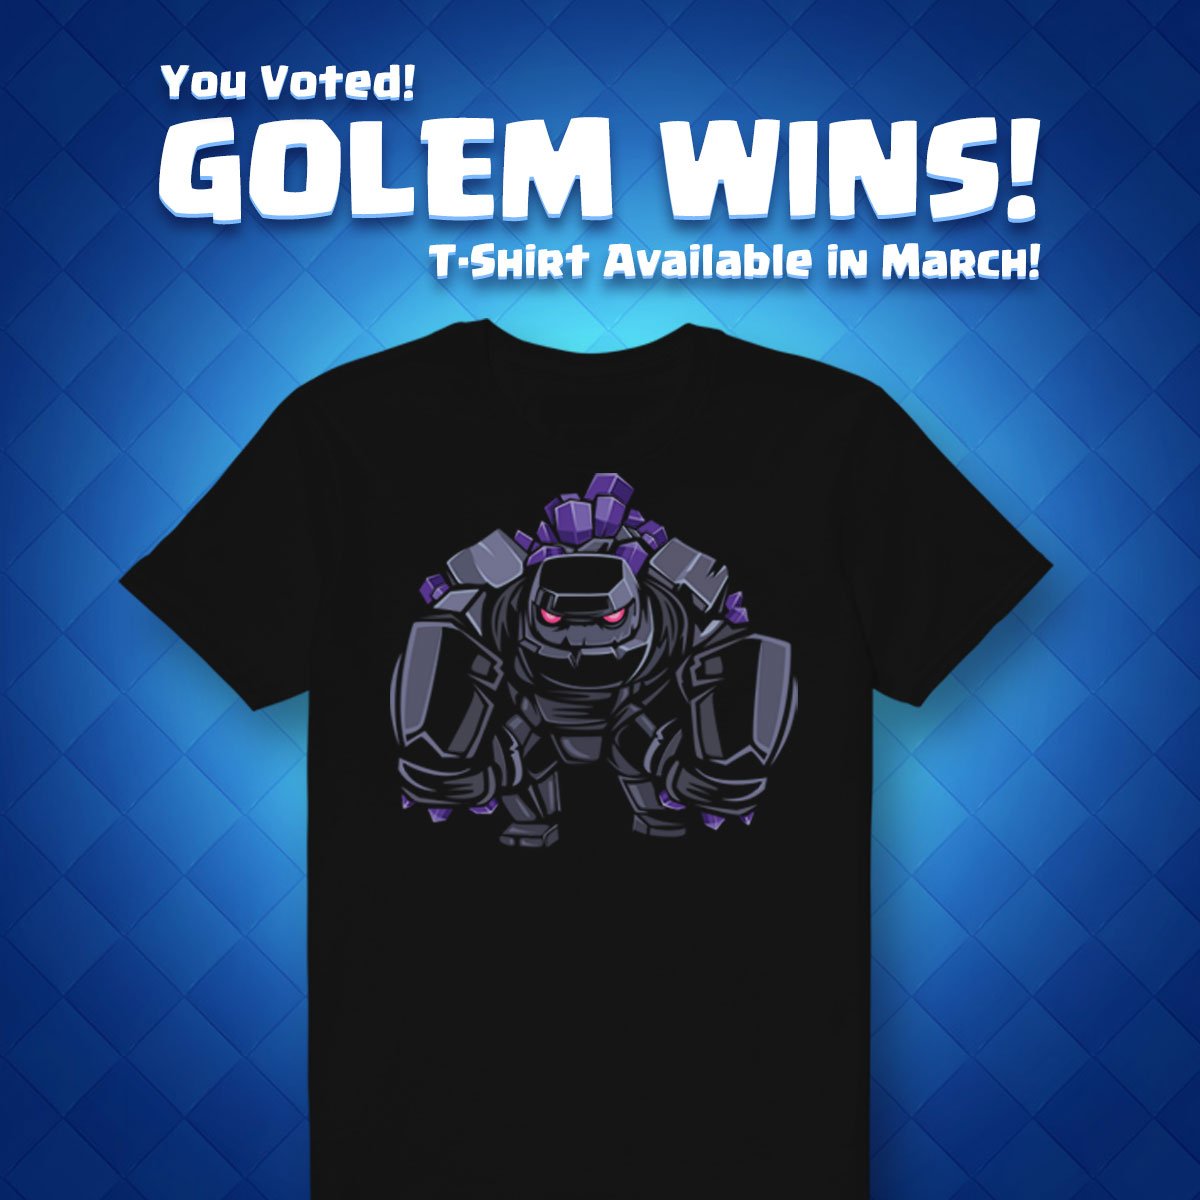 Clash Royale The Golem Shirt Beats Down The Rest Of The T Shirt Competition It Ll Be Available From T Co Fb9cwk3zvt In March Thanks For Voting T Co Q7pp1193oy